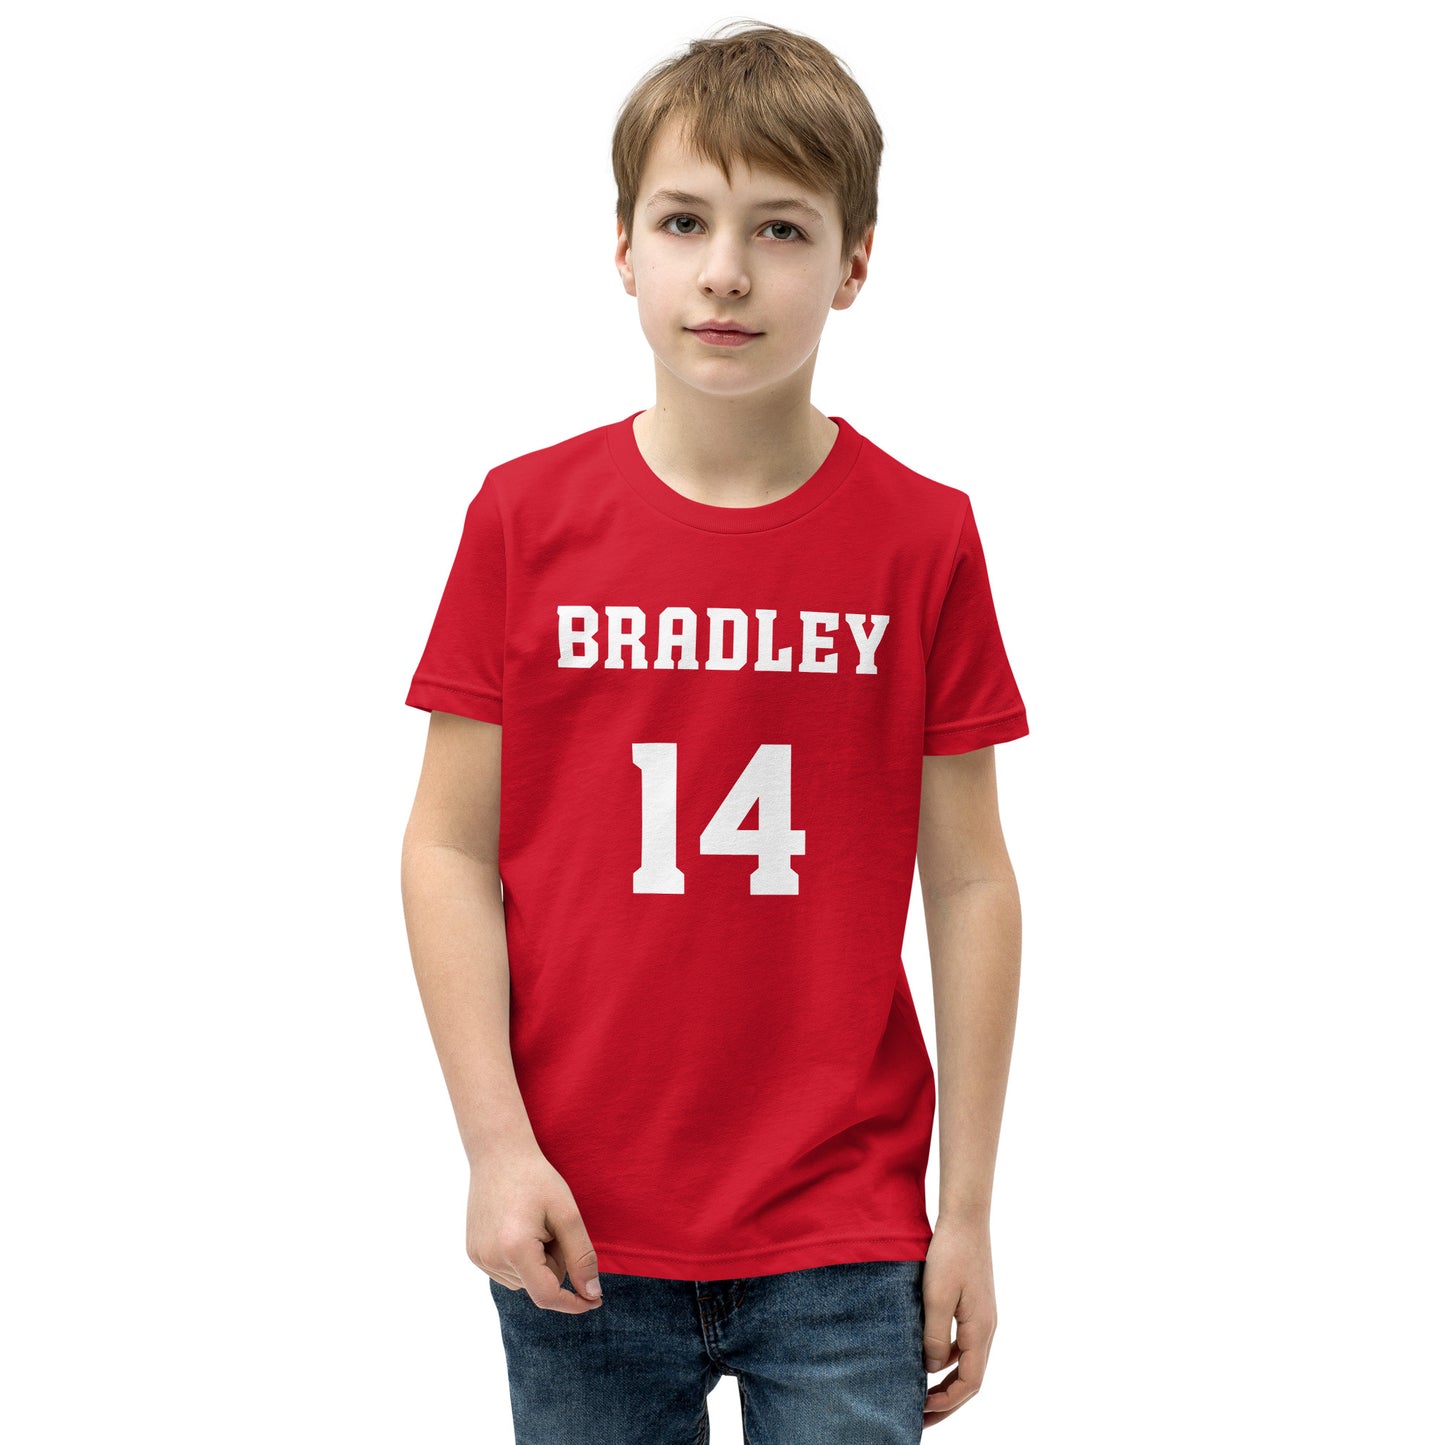 Malevy Leons Kids Jersey T-Shirt Red